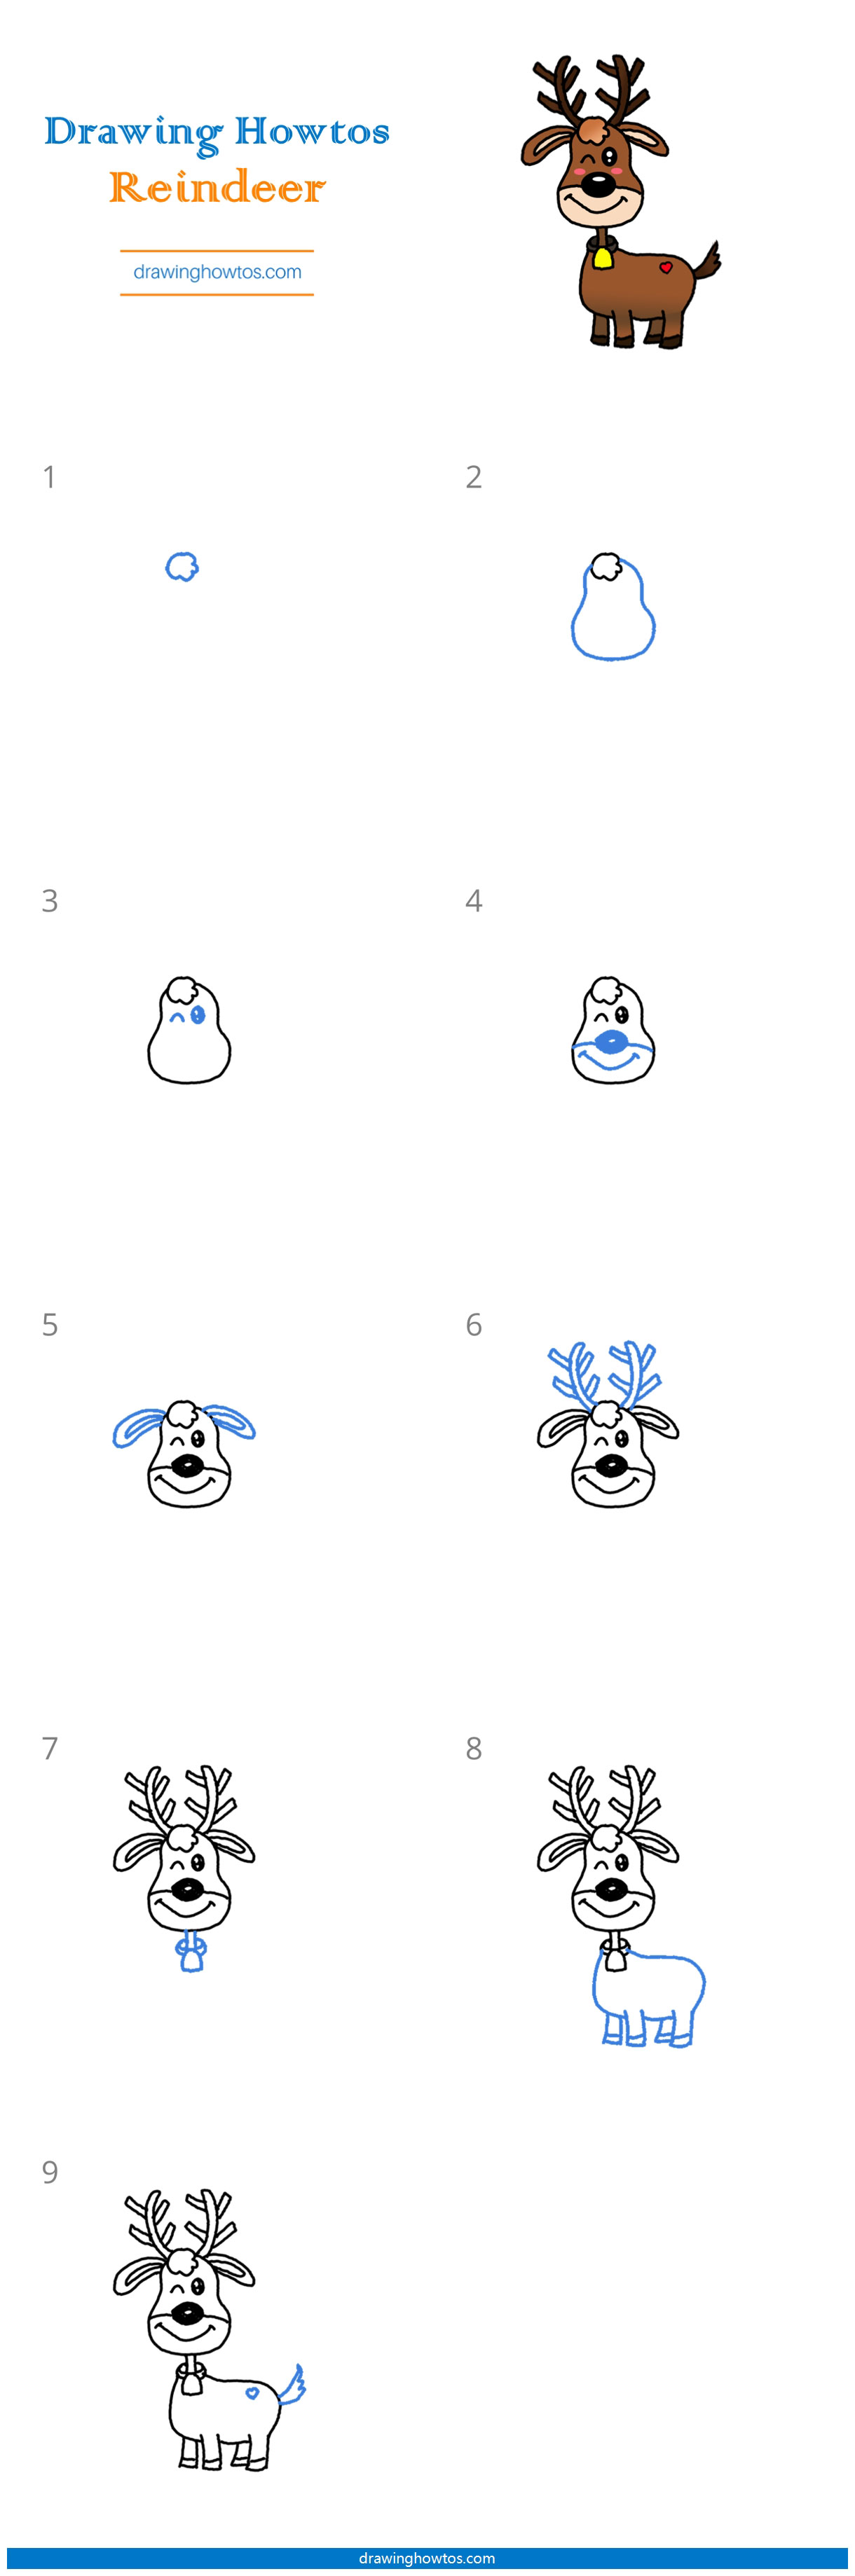 How to Draw a Reindeer Step by Step